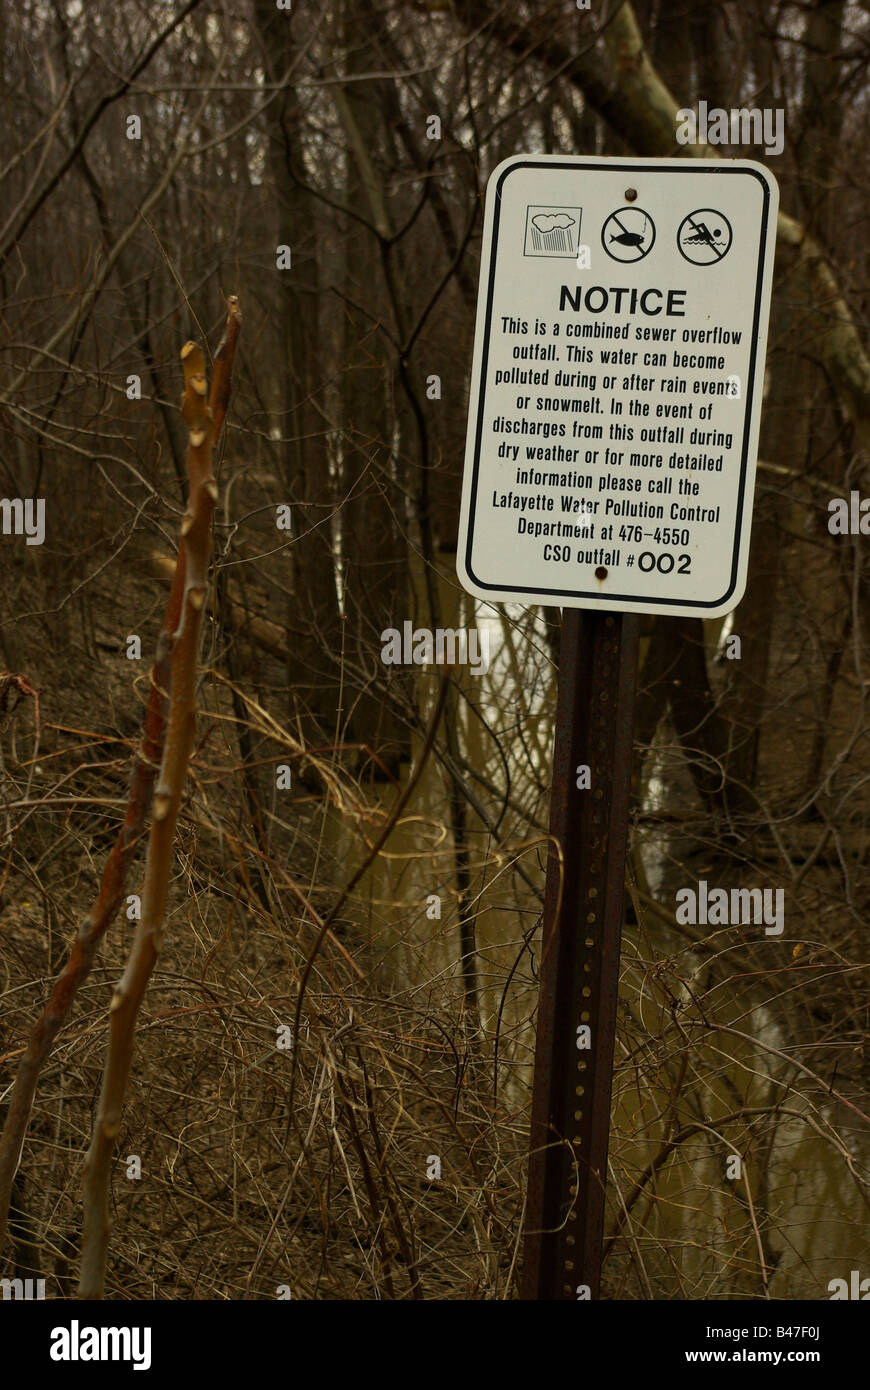 A sign warning of water pollution near the Wabash River Stock Photo